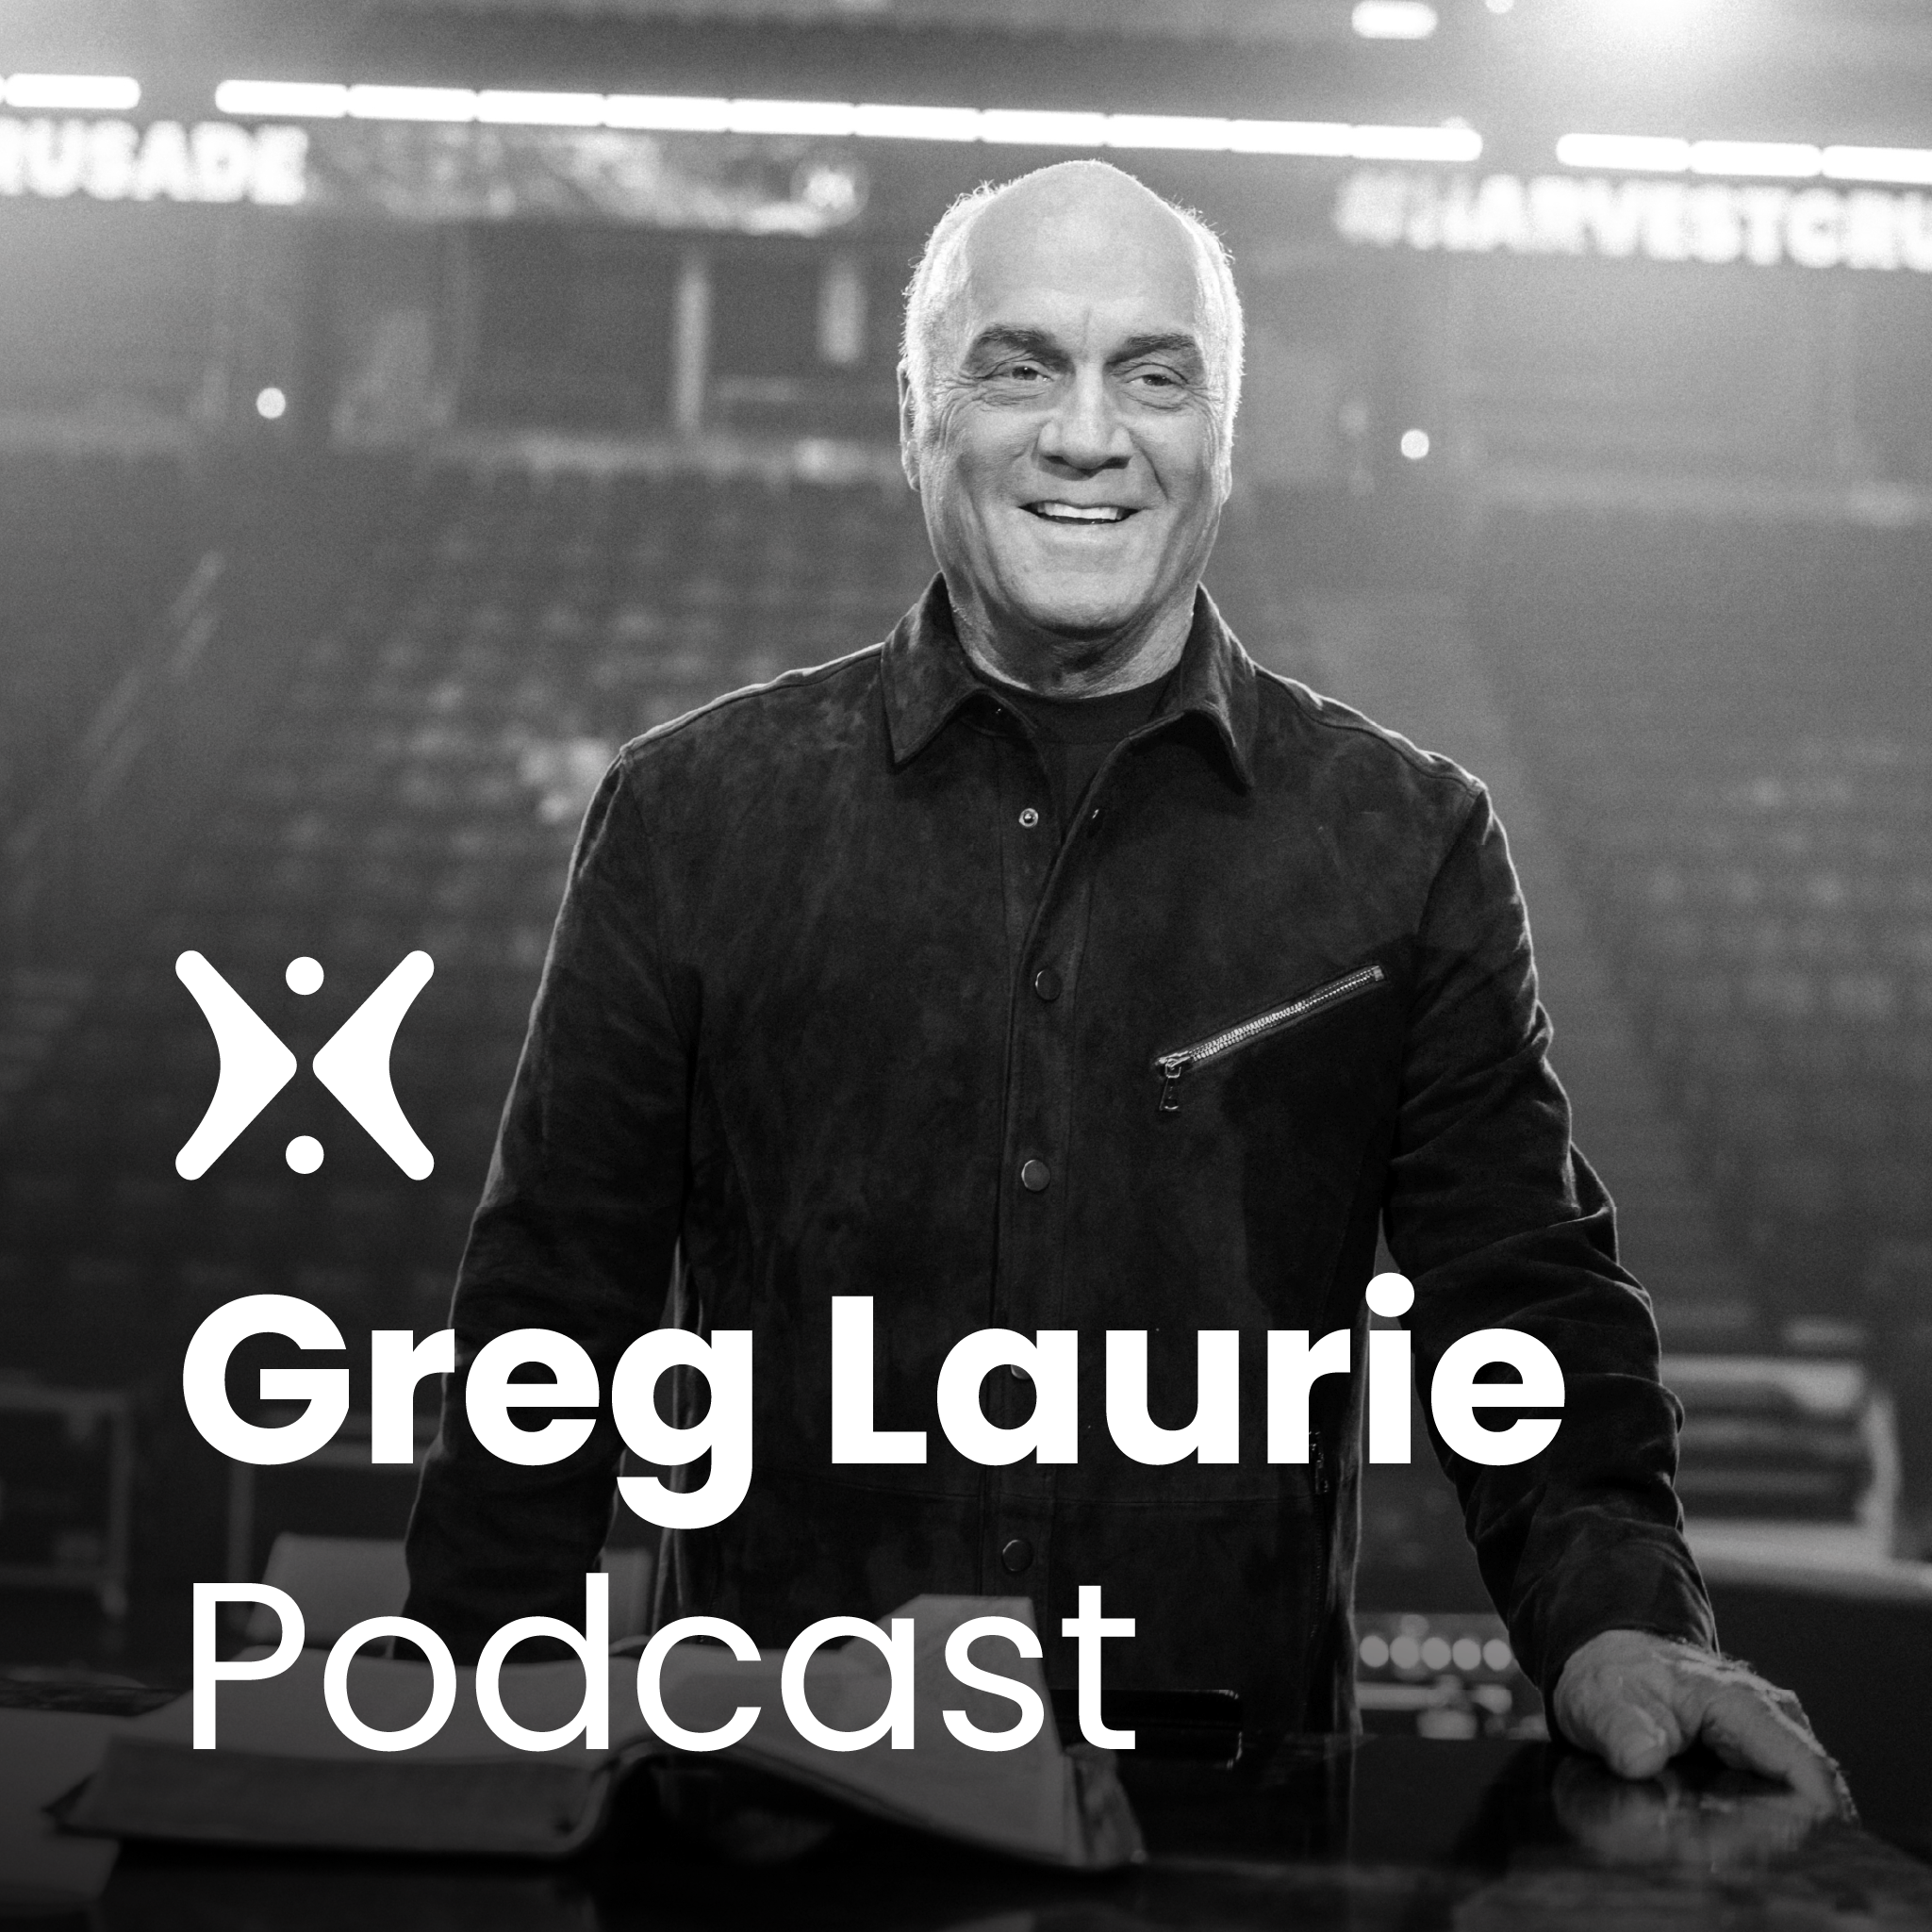 How to Overcome Your Giants | Sunday Message with Greg Laurie